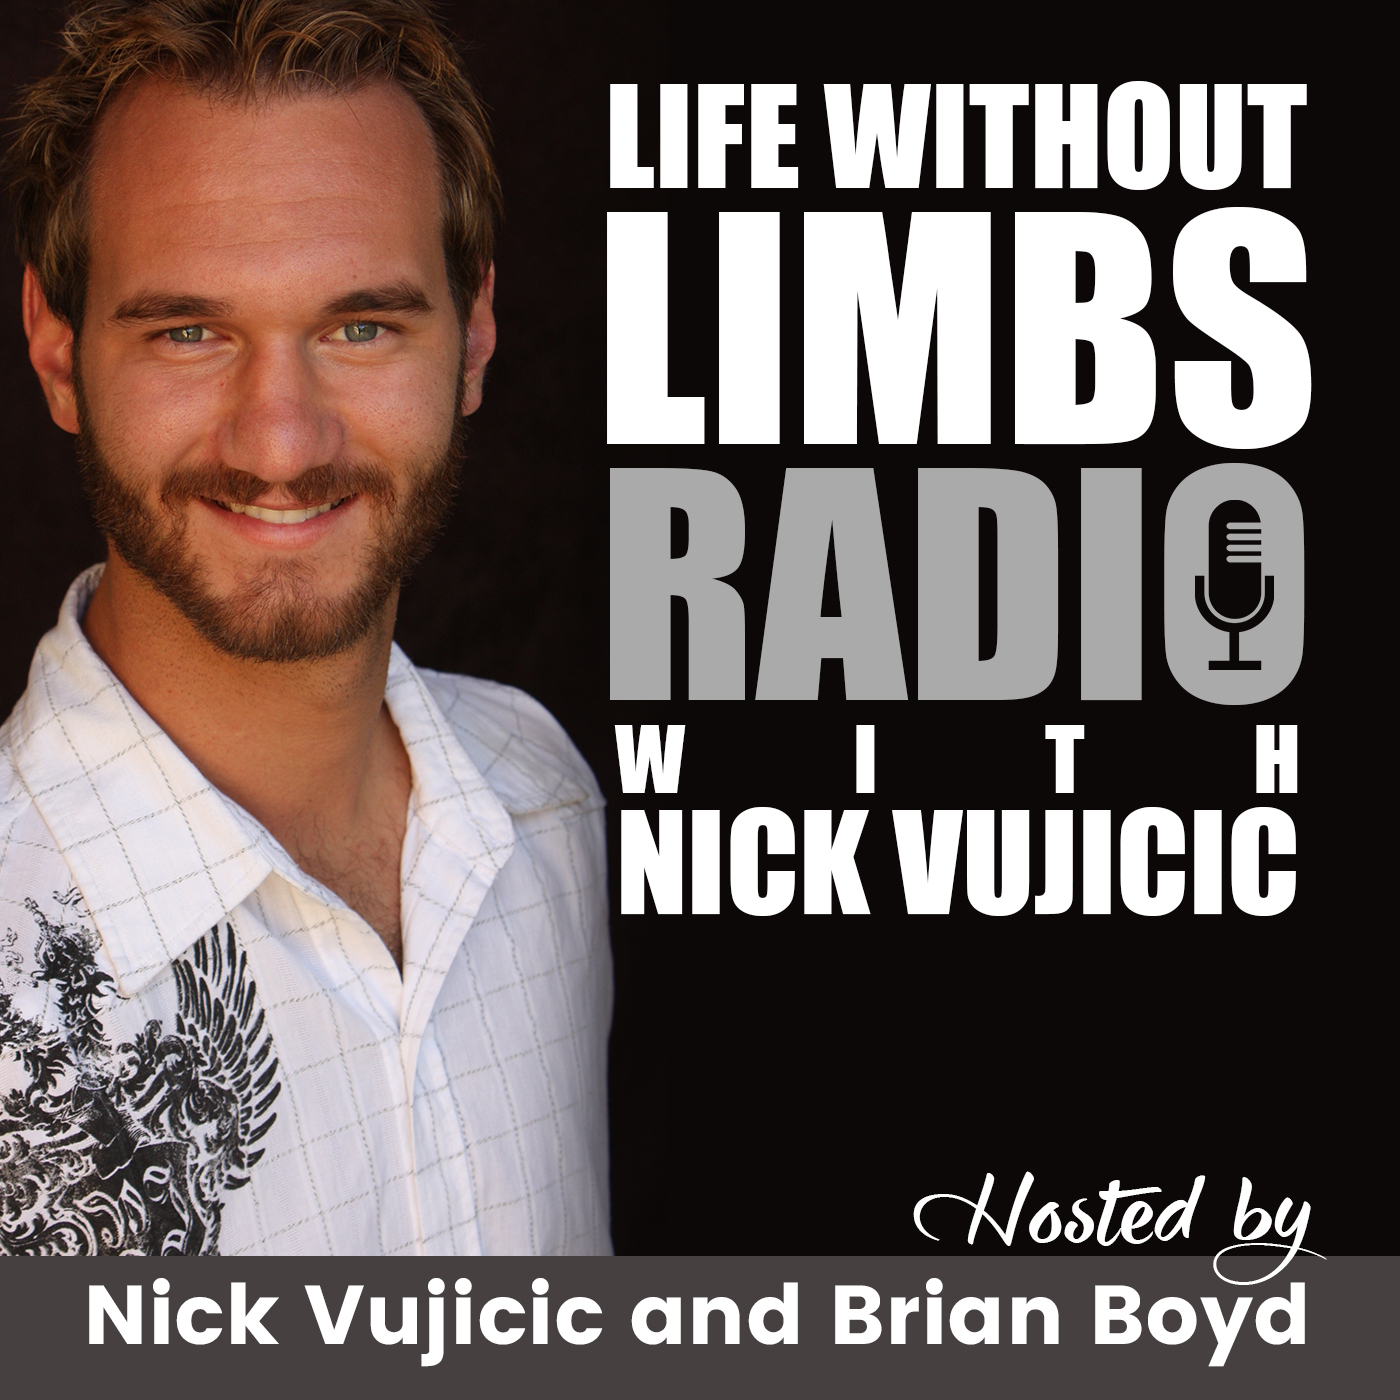 Living Your Faith: A Candid Conversation with Nick Vujicic on Authentic Evangelism